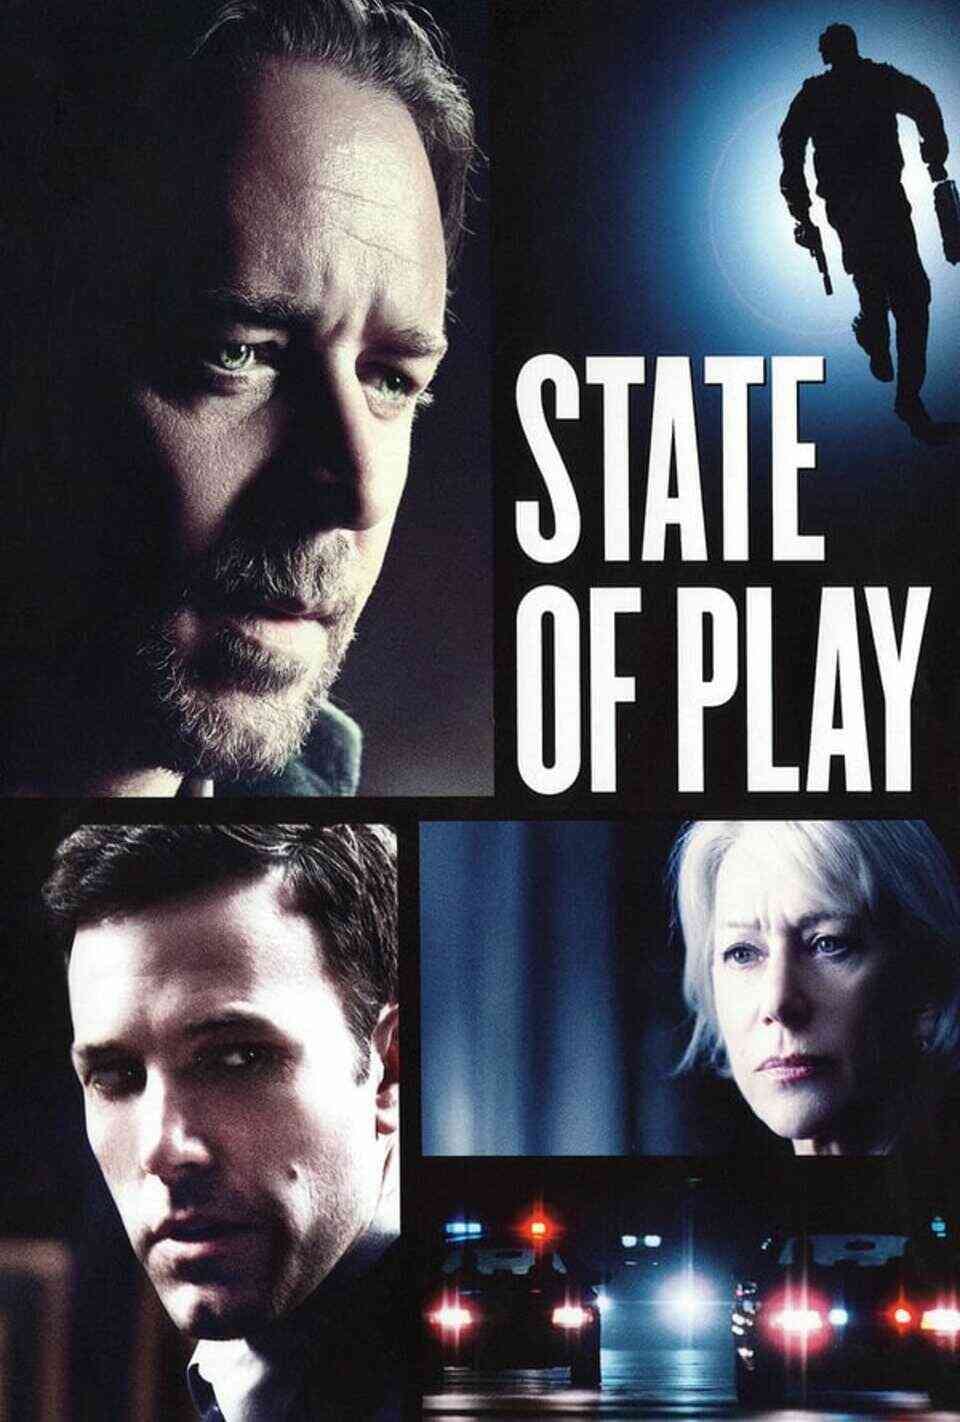 Read State of Play screenplay (poster)